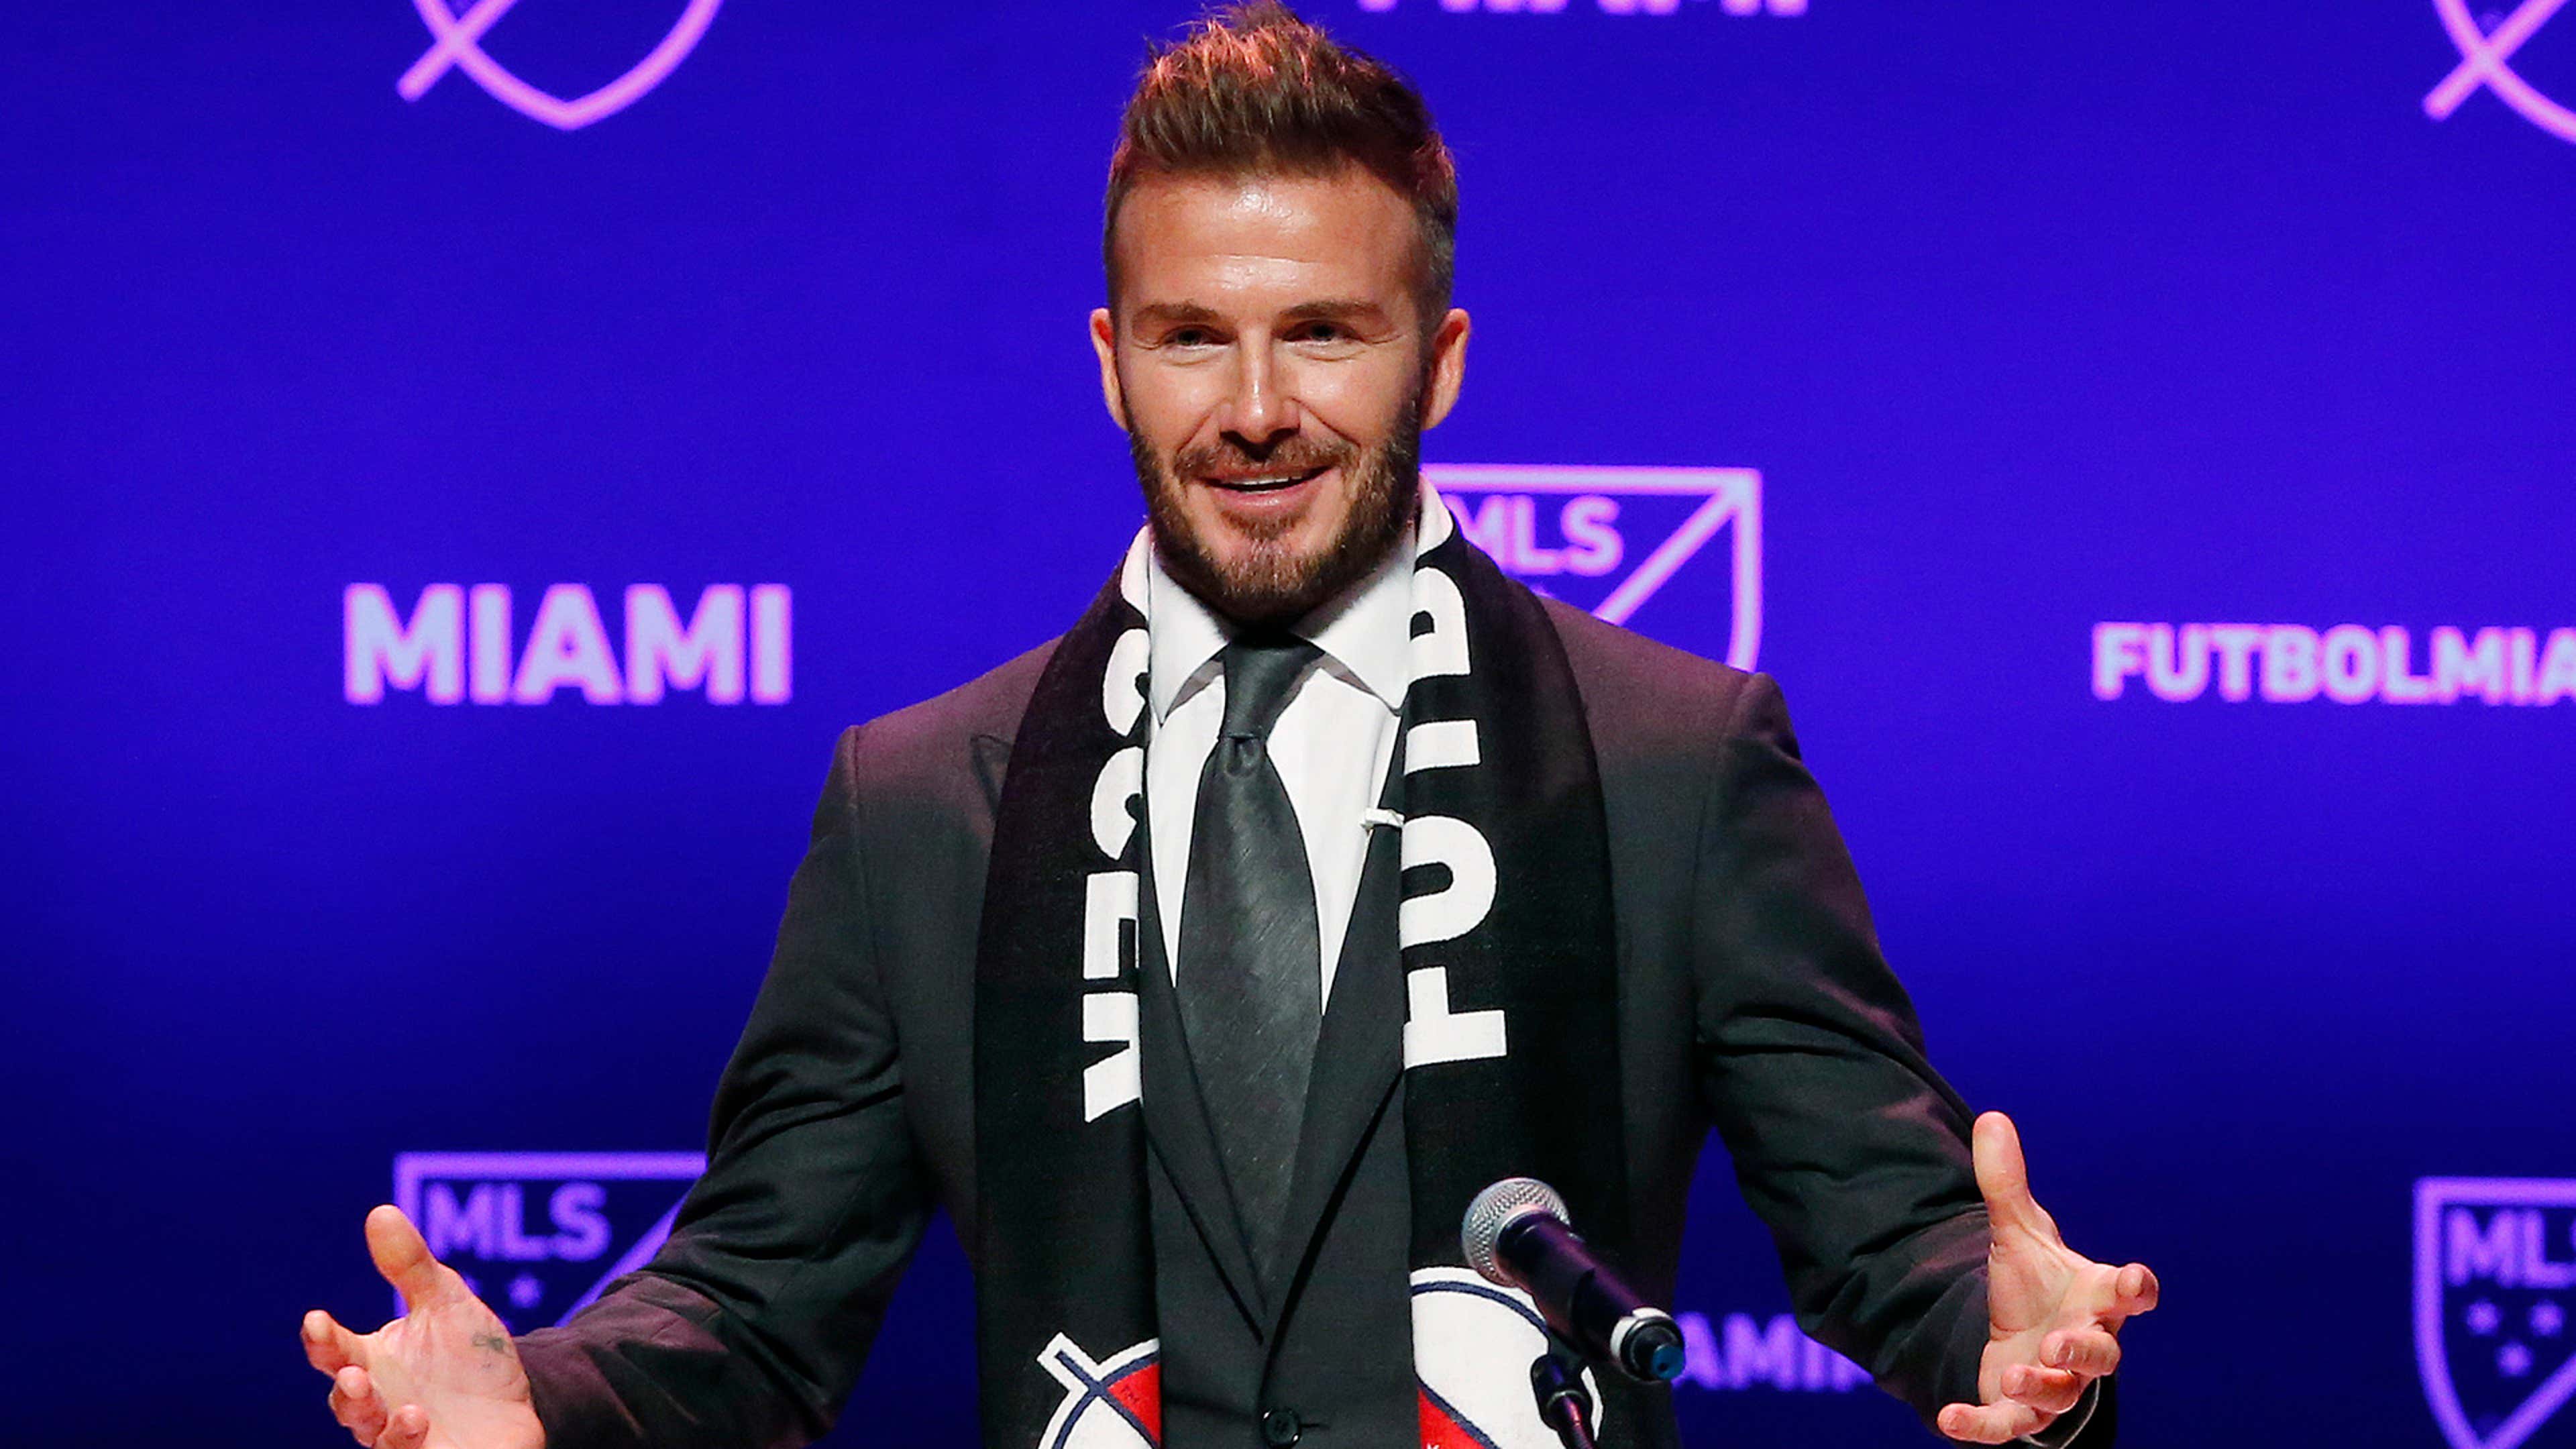 David Beckham's Inter Miami could be a great team. But it has to